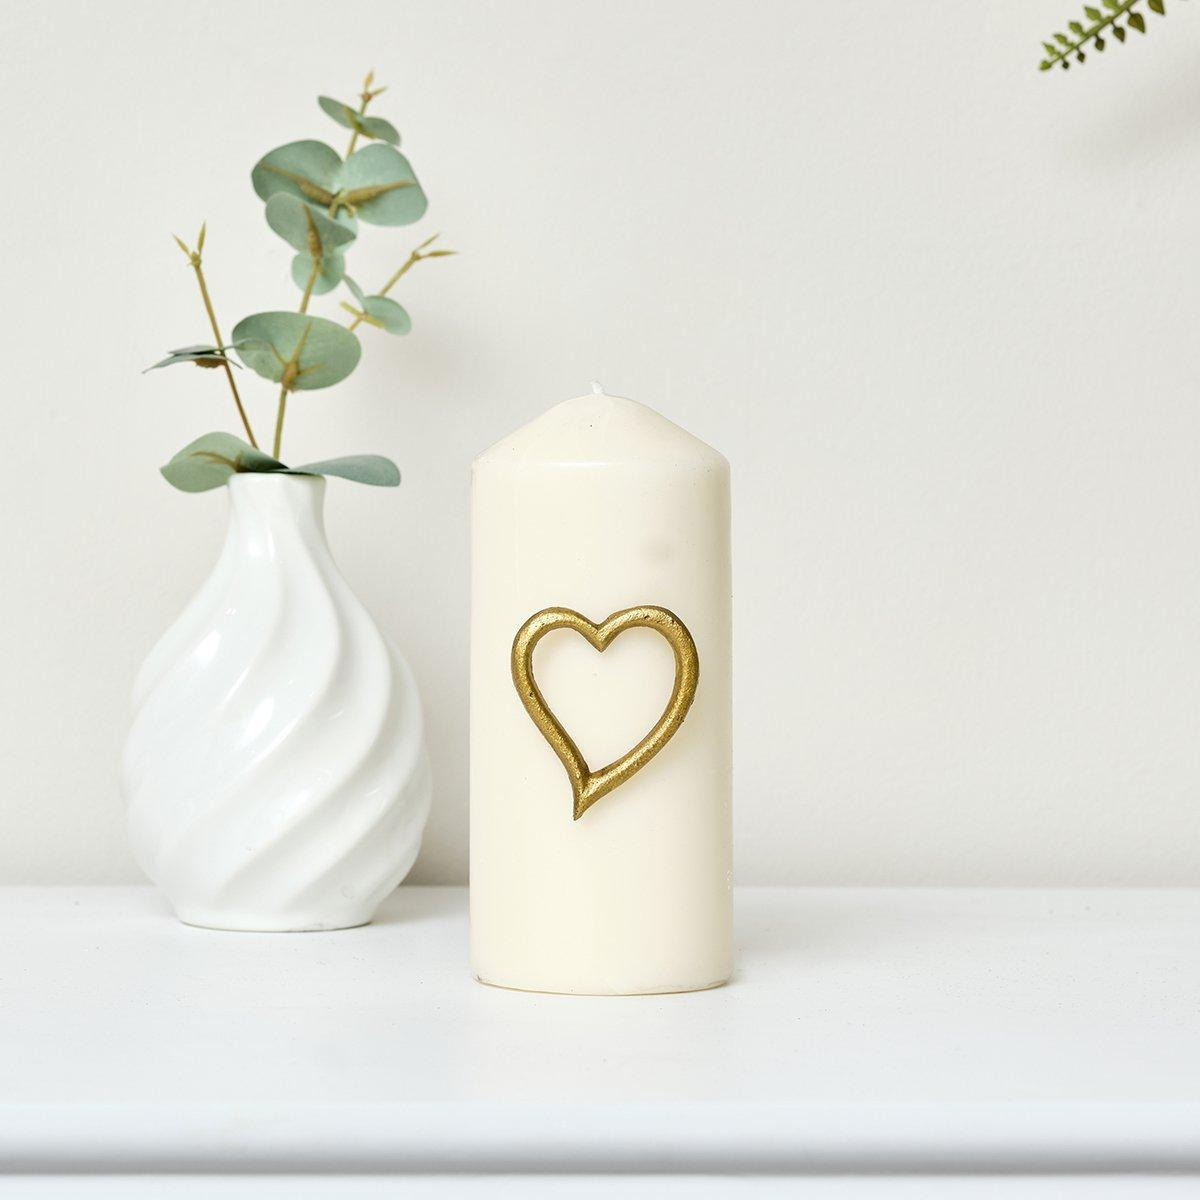 Antique Gold Heart Candle Pin - image 1